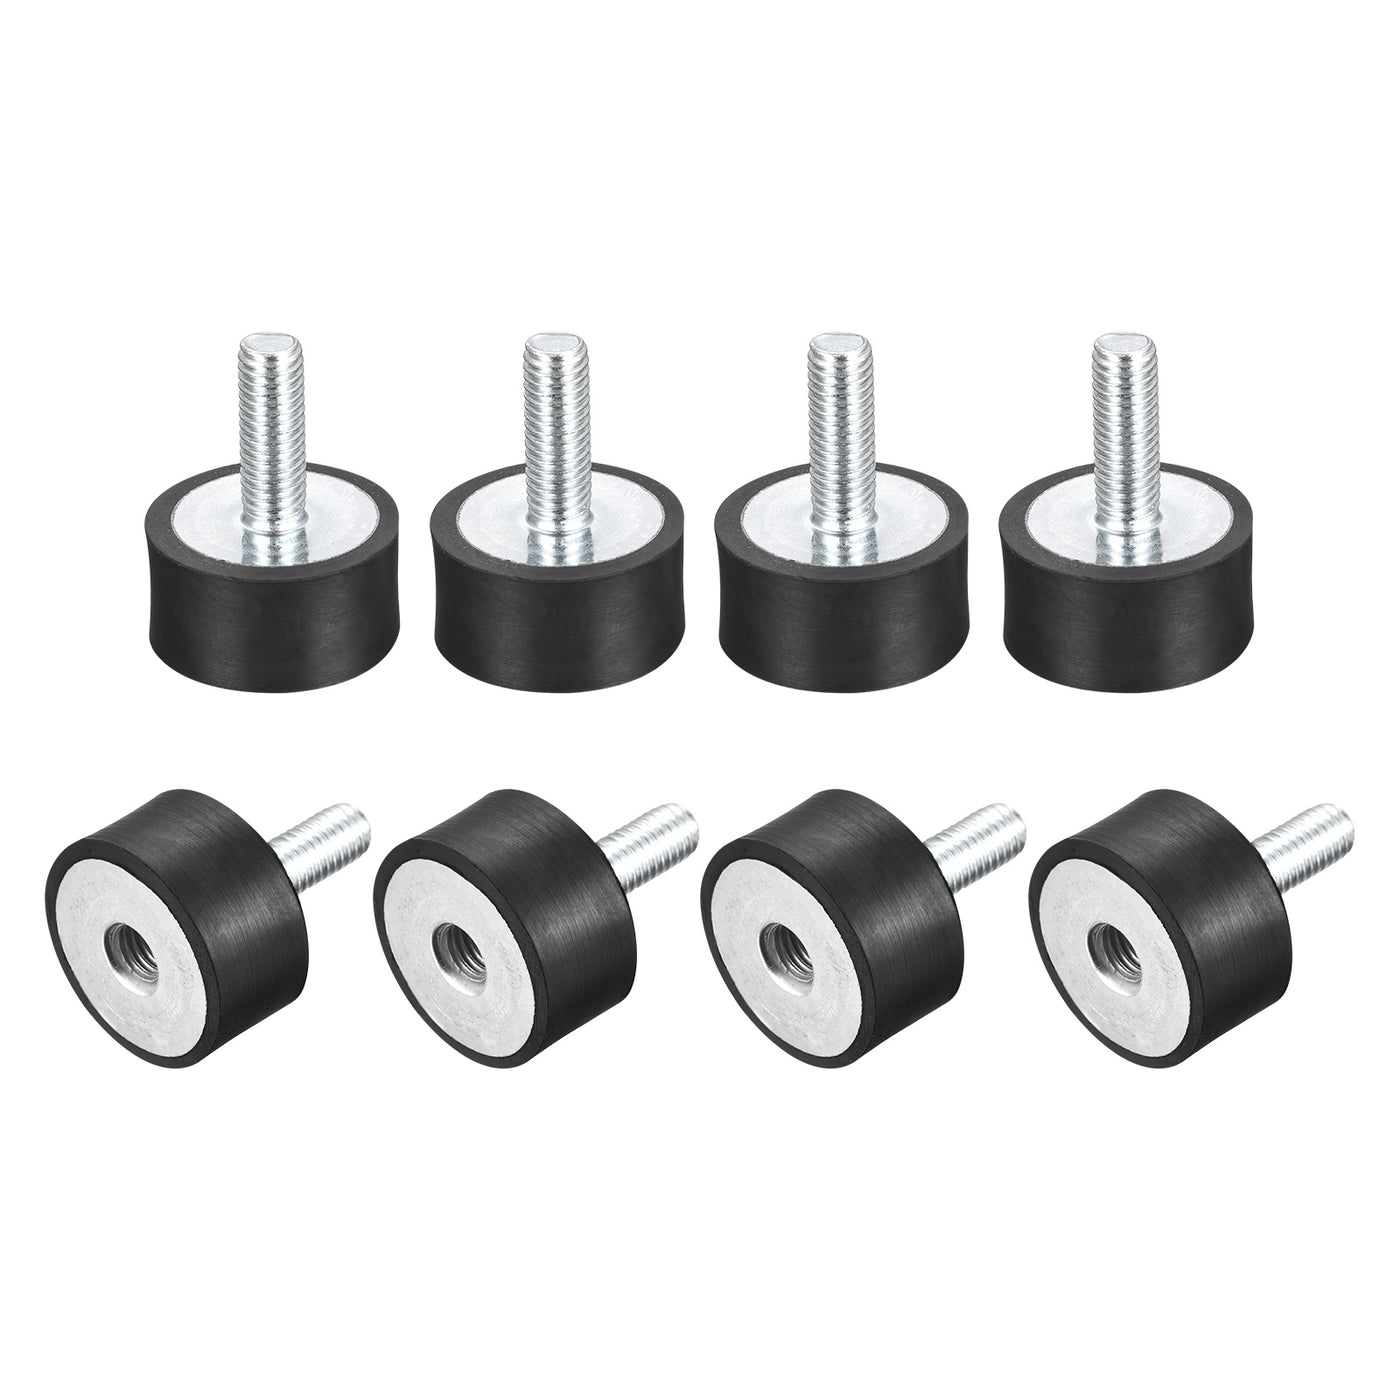 uxcell Uxcell Rubber Mount 8pcs M8 Male/Female Vibration Isolator Shock Absorber, D30mmxH15mm